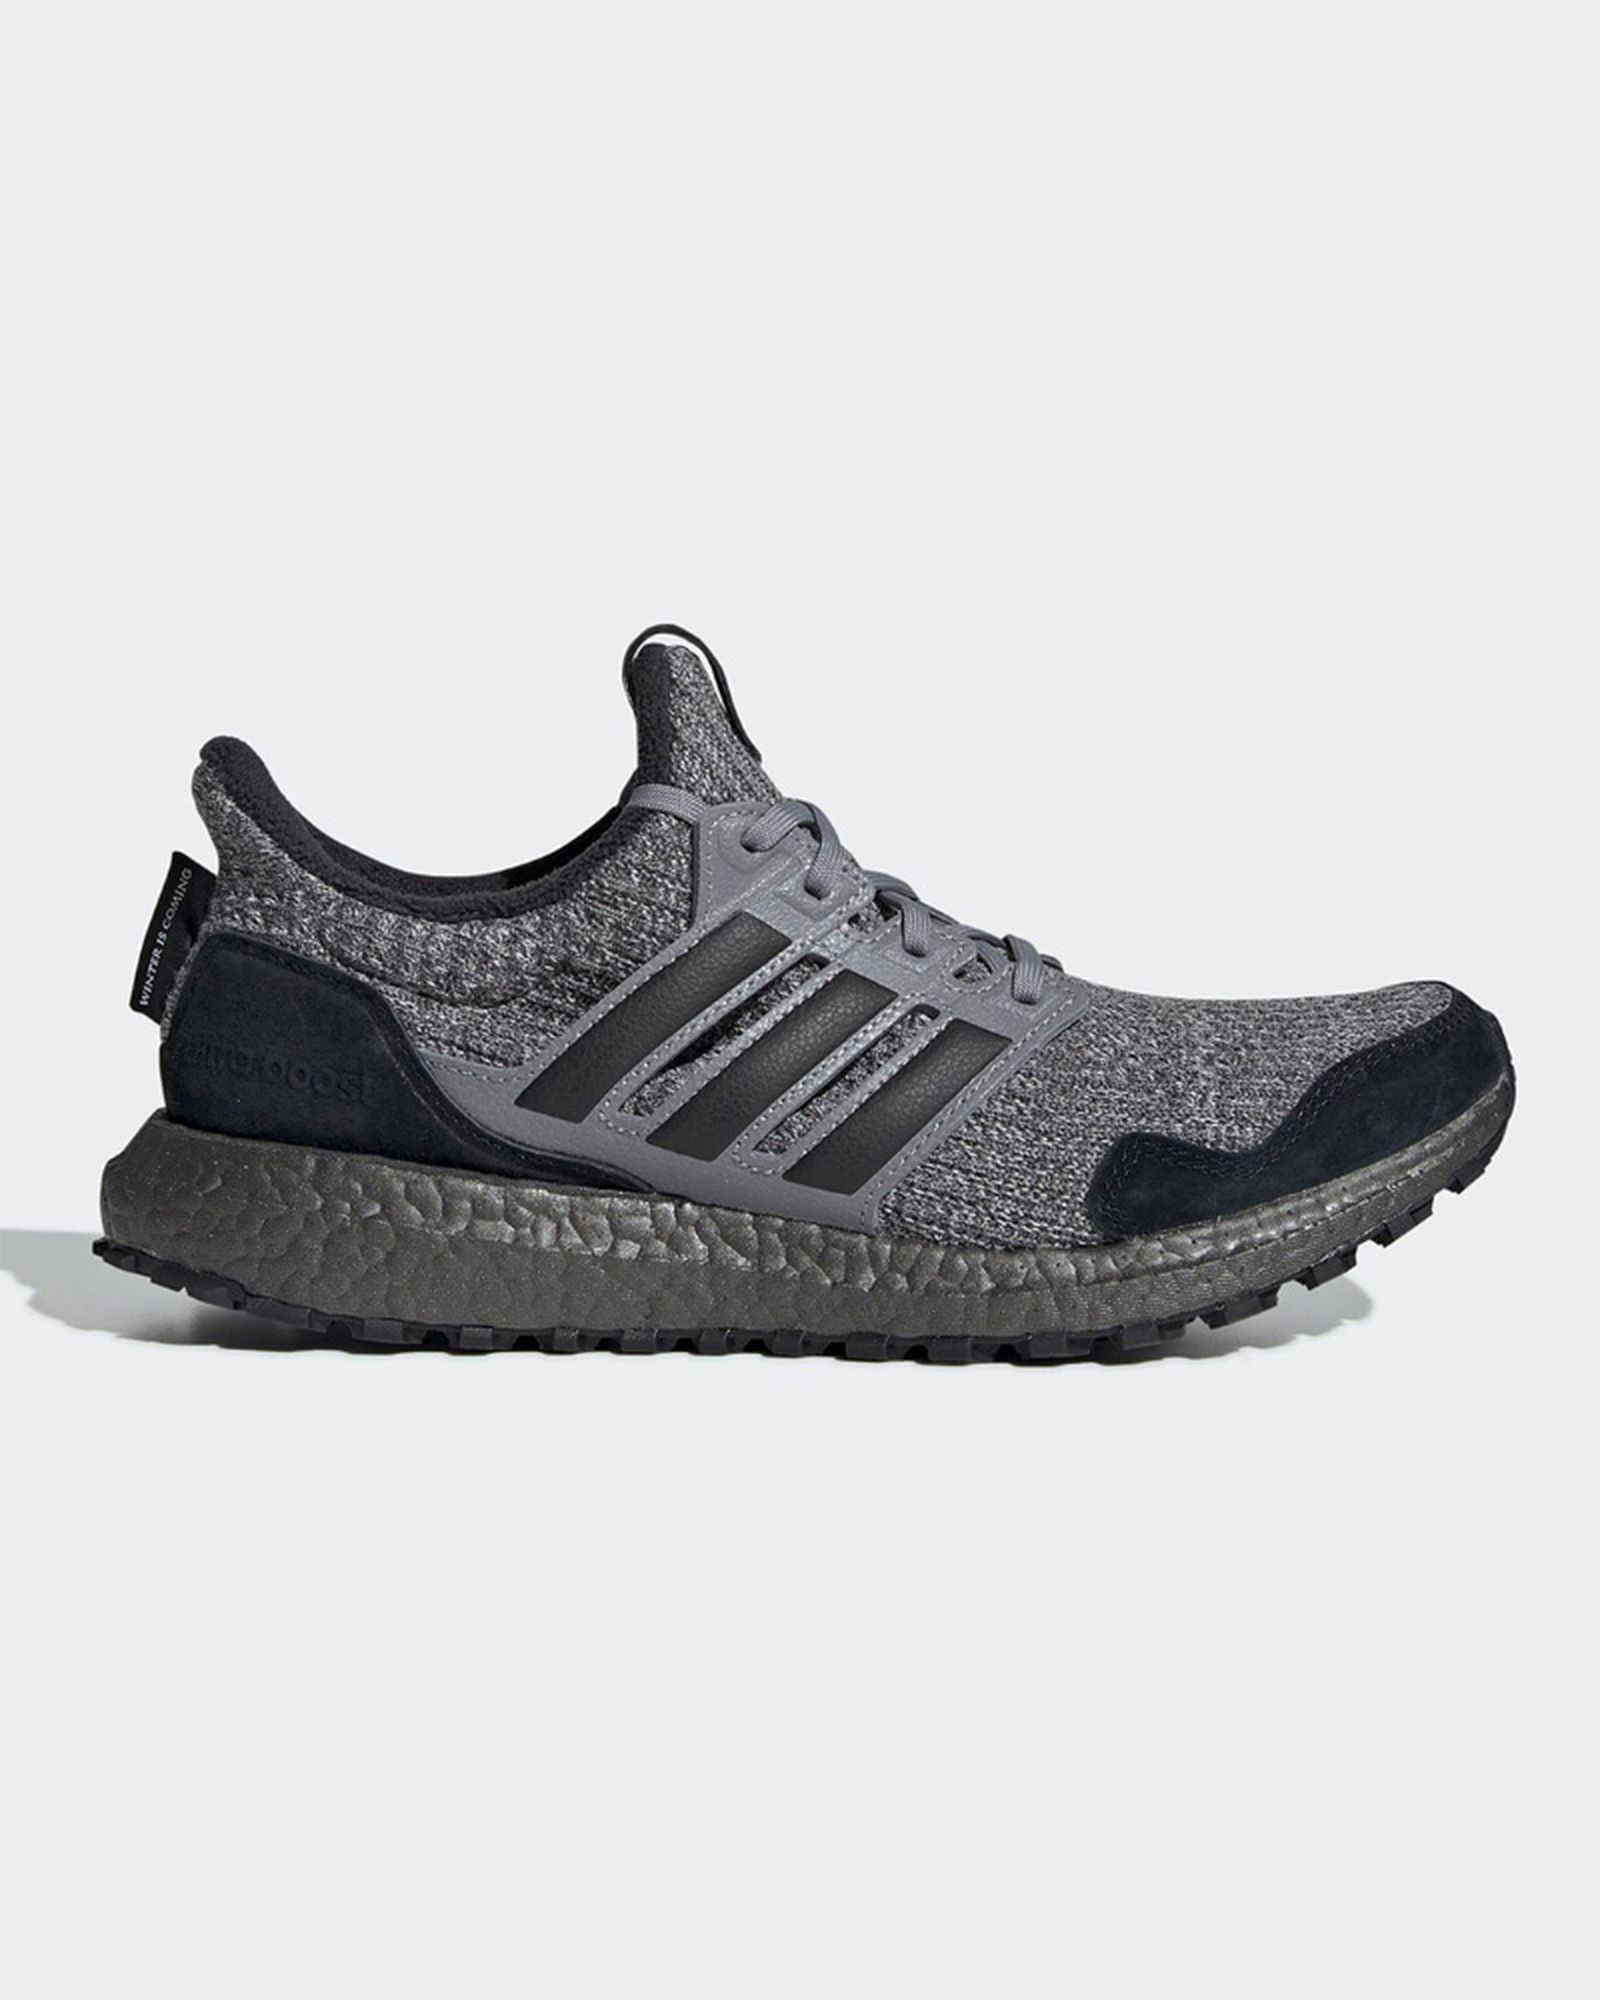 game-of-thrones-adidas-ultra-boost-colorways-04